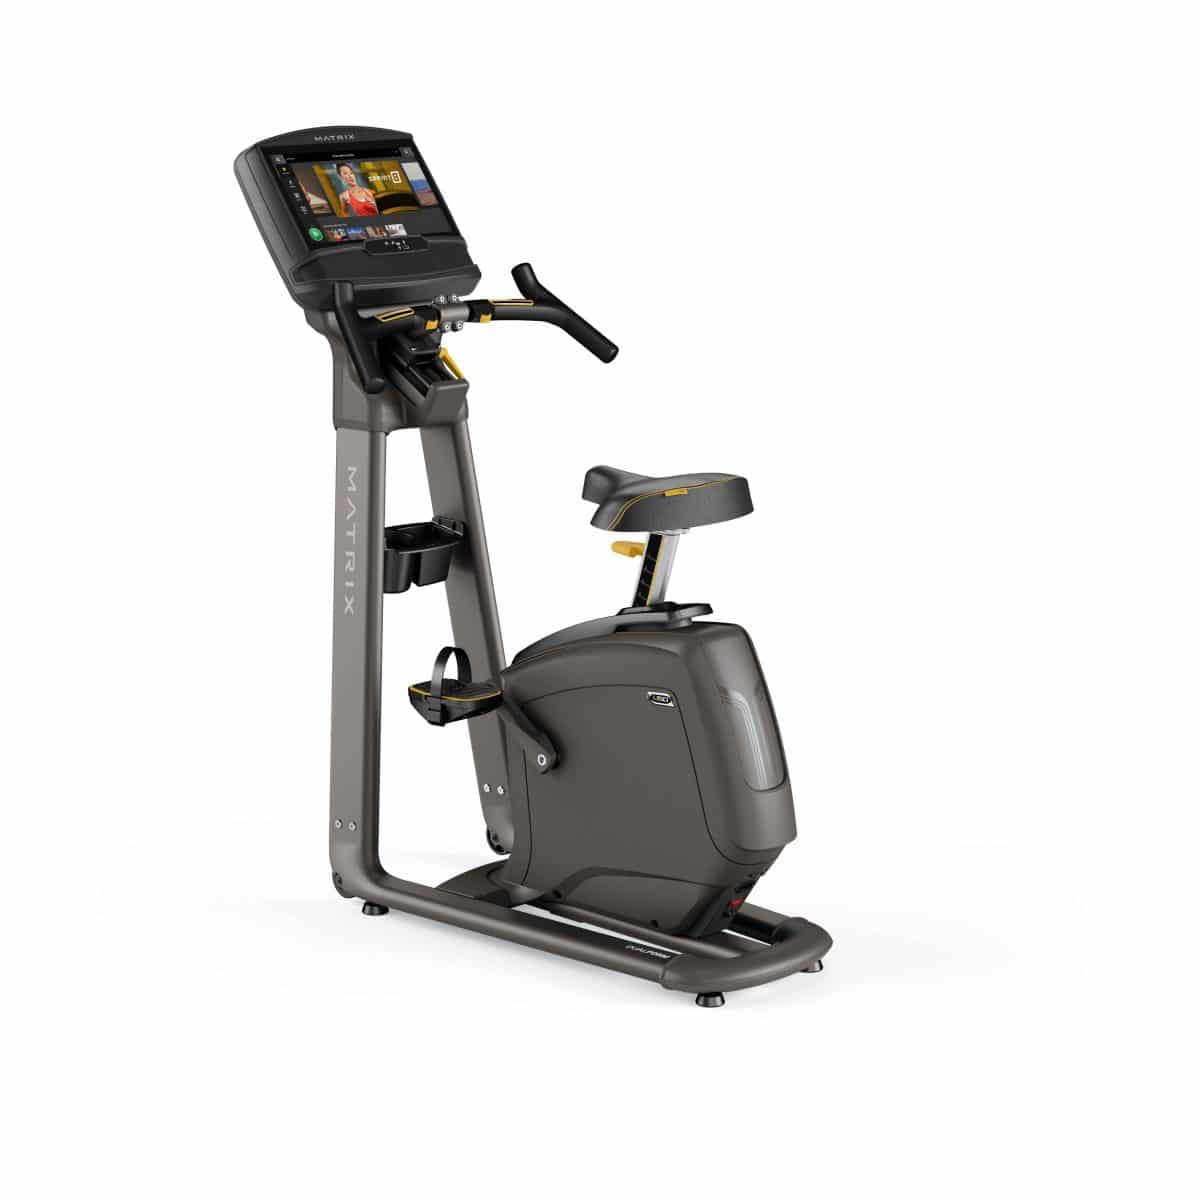 A stationary exercise bike with a monitor on it.